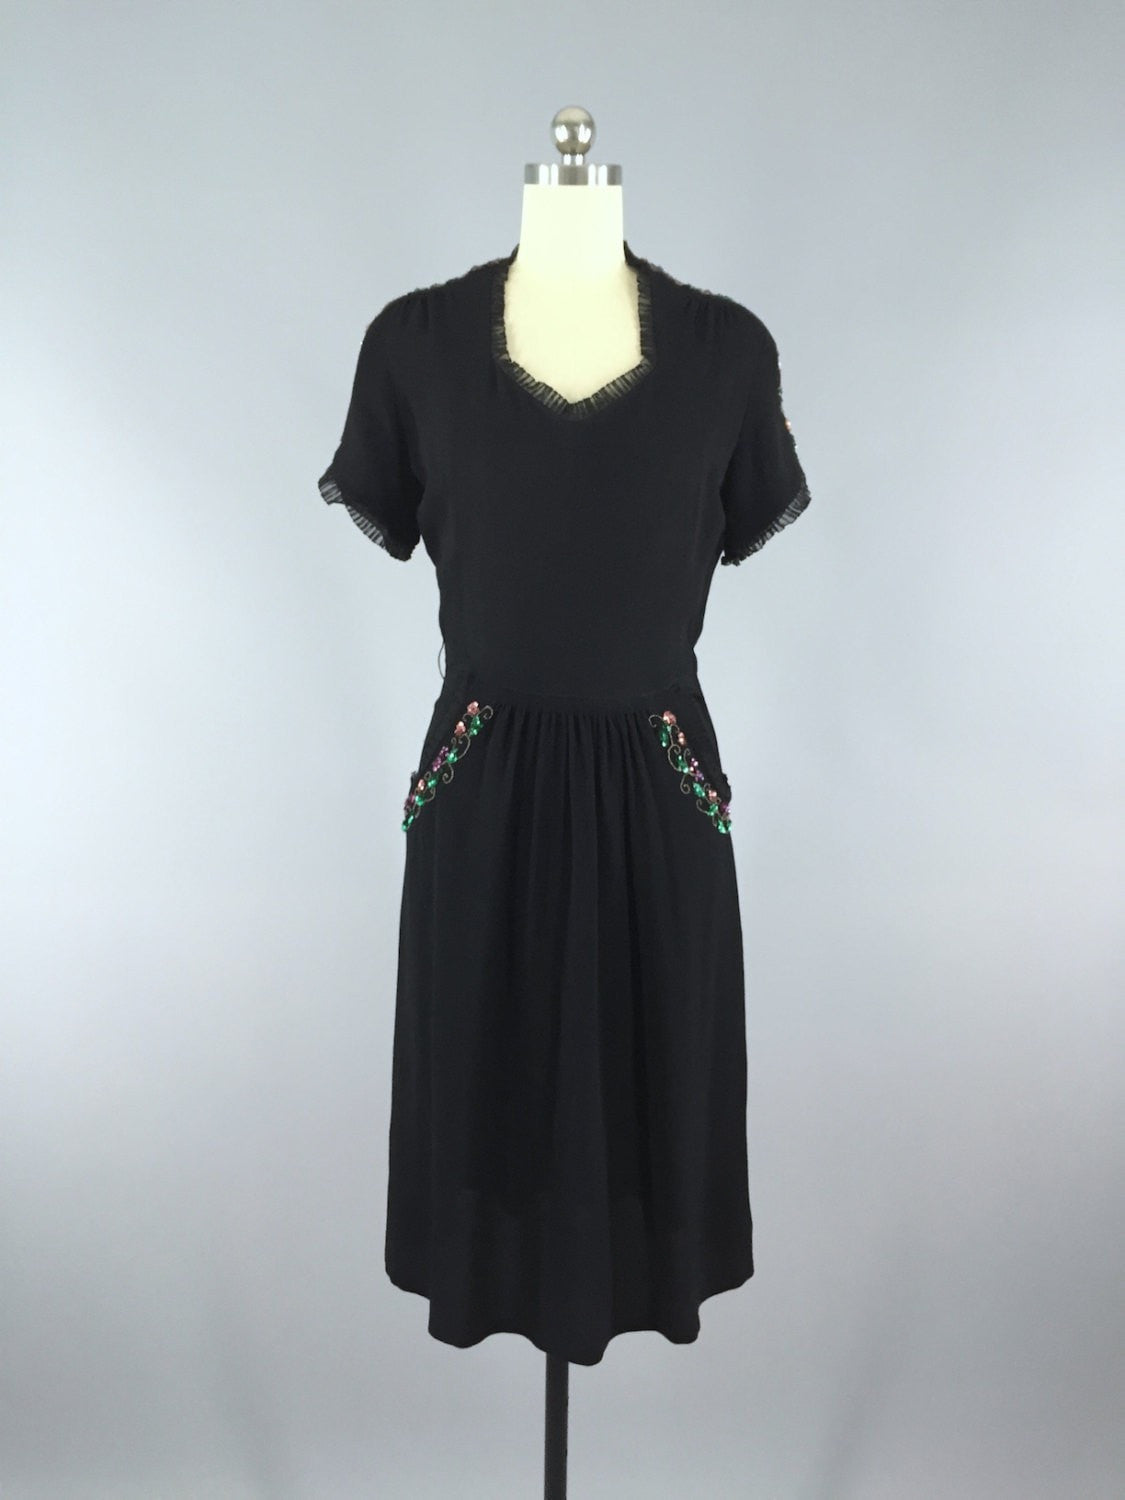 Vintage 1940s Sequined Crepe Dress - ThisBlueBird